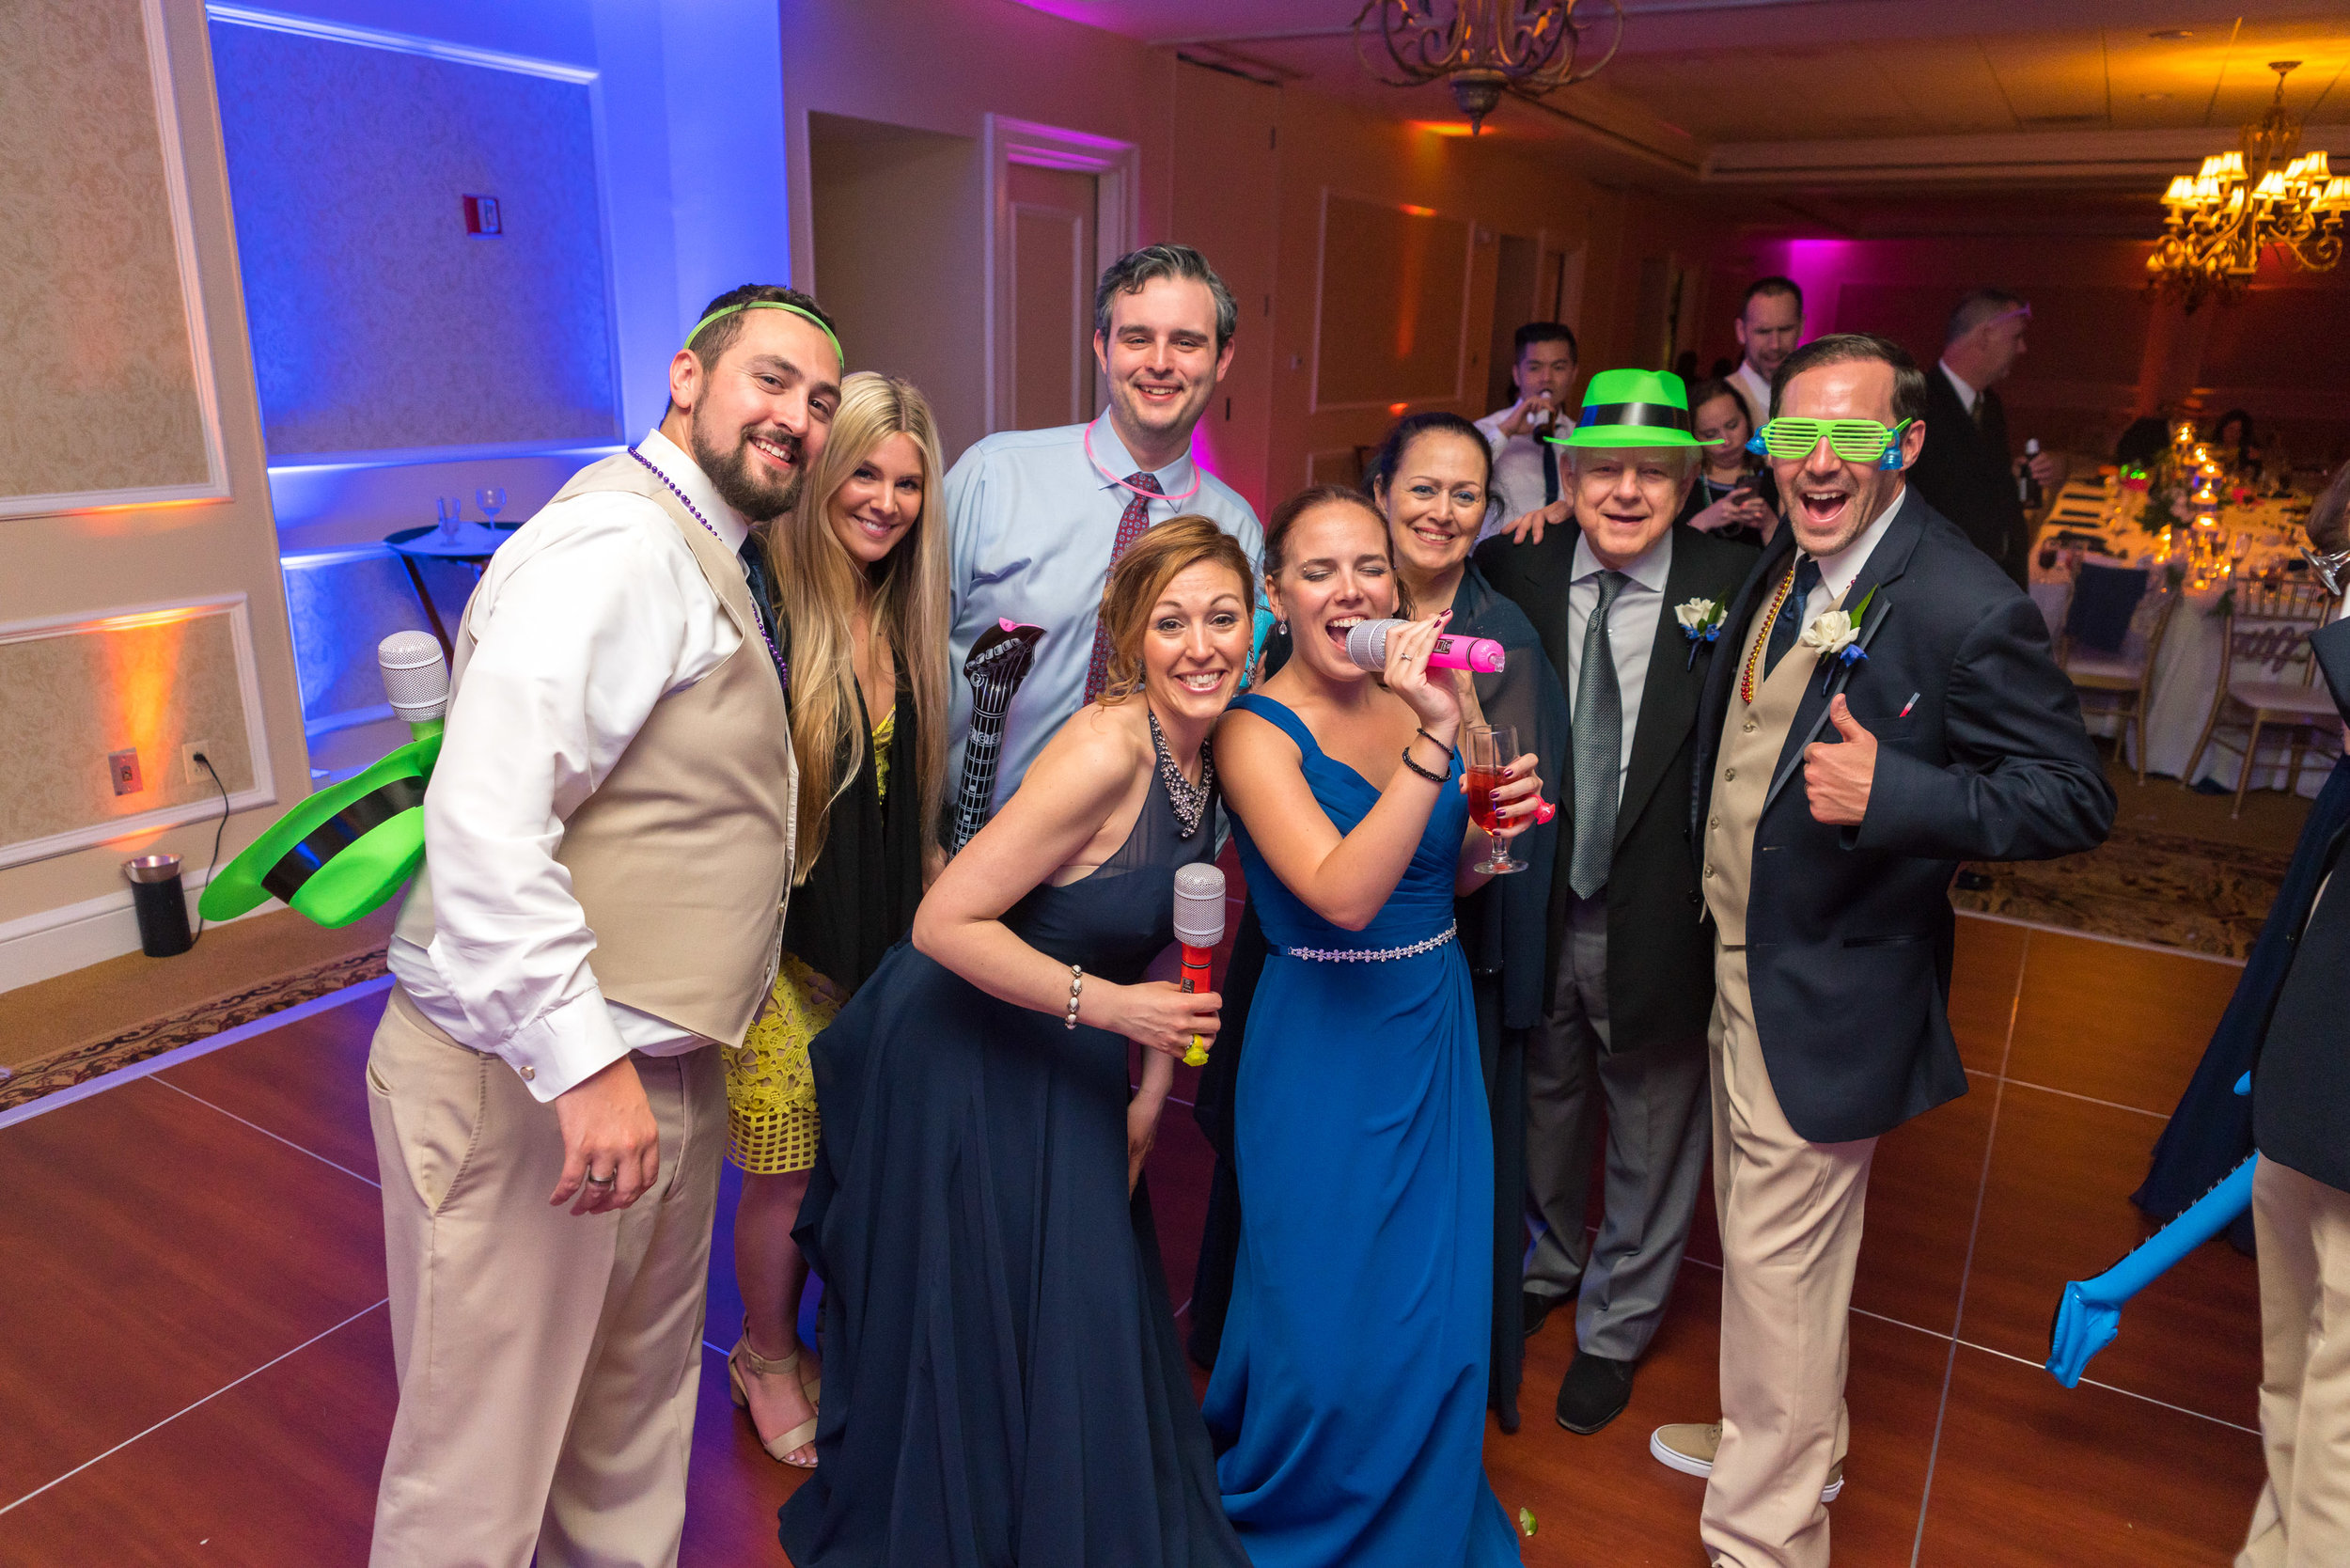 Wedding group photo on the dance floor at Rockville Manor Country Club